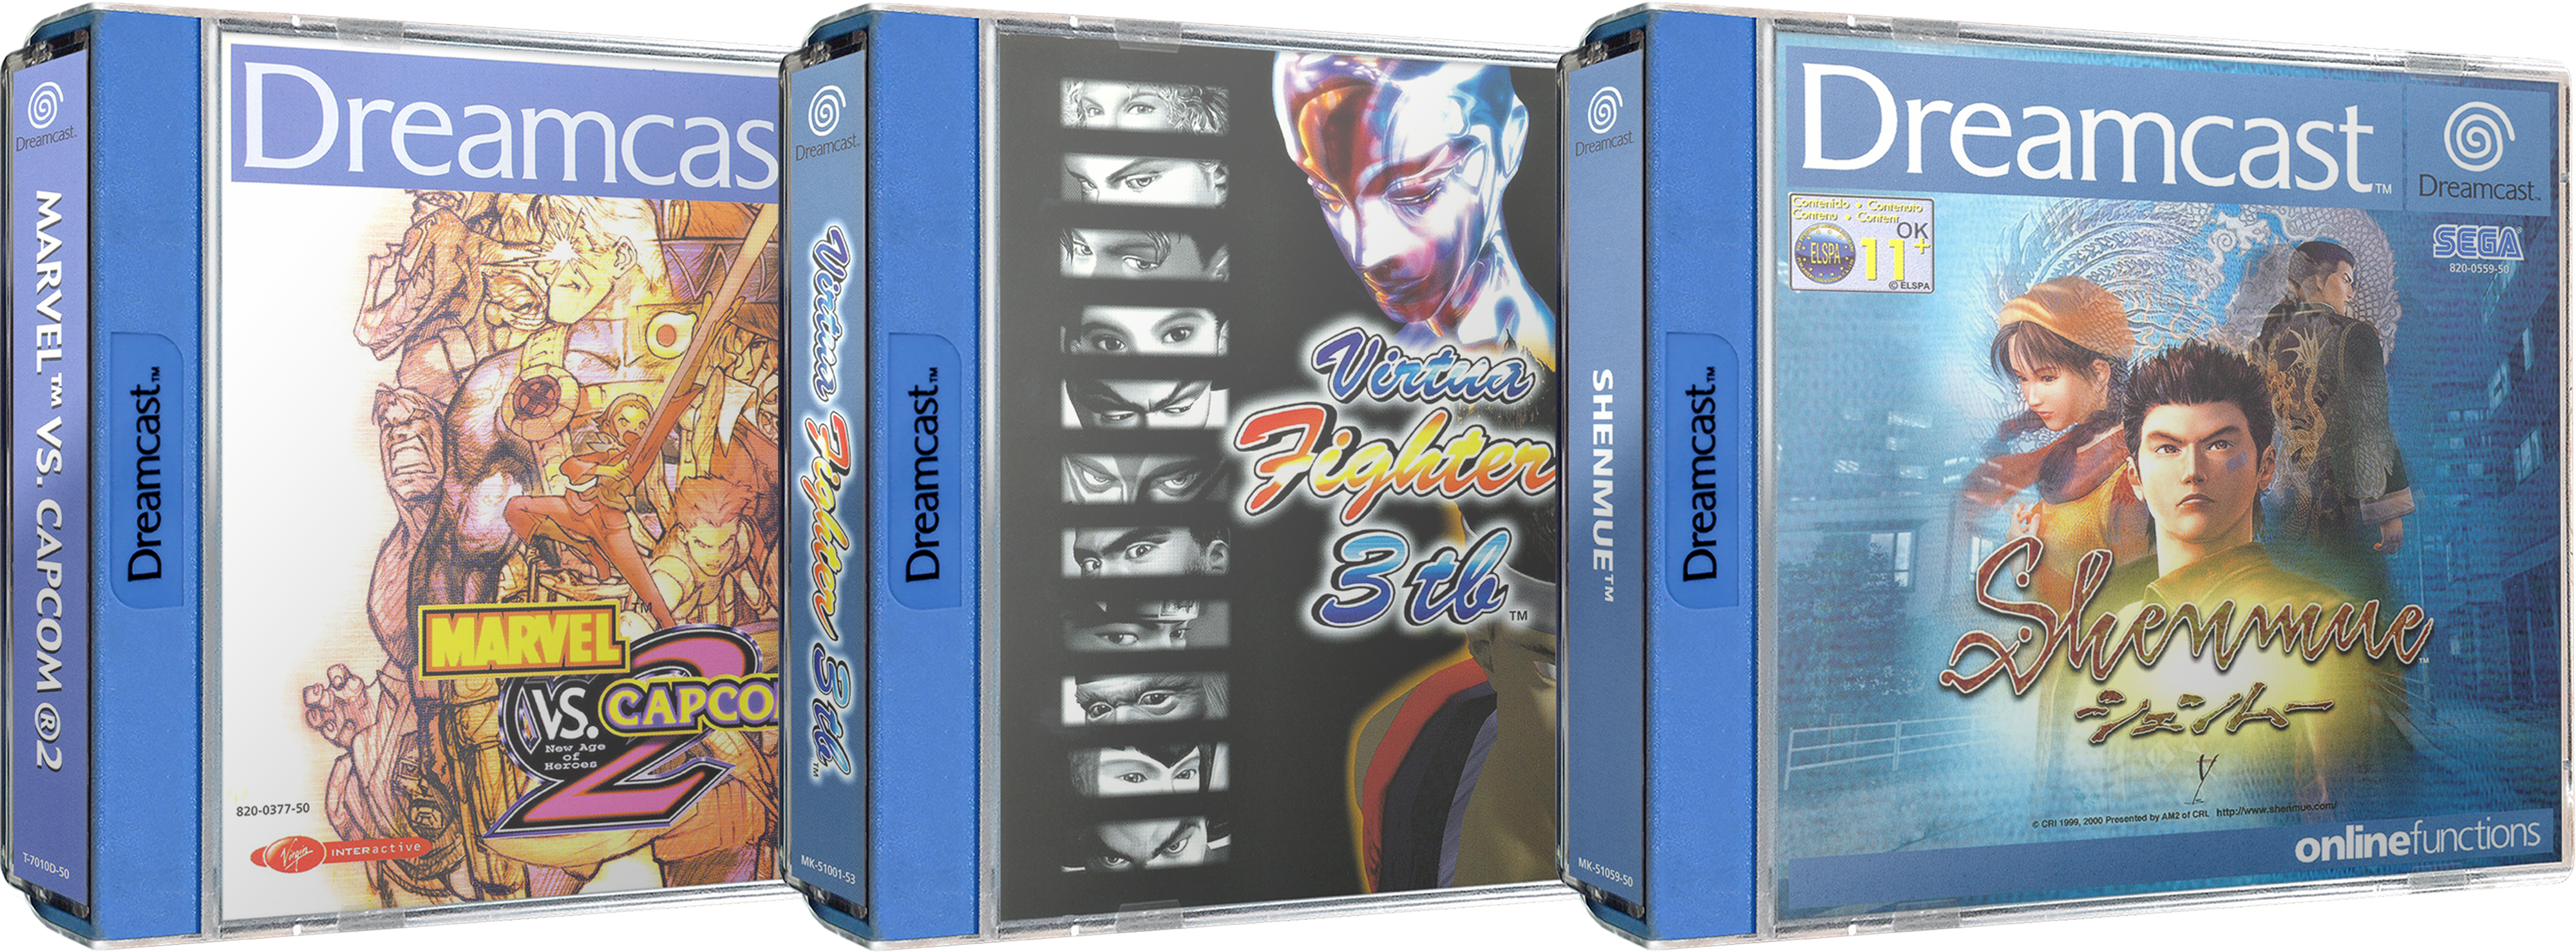 More information about "Sega Dreamcast 3D Box Pack - Europe (255) (2 Versions)"